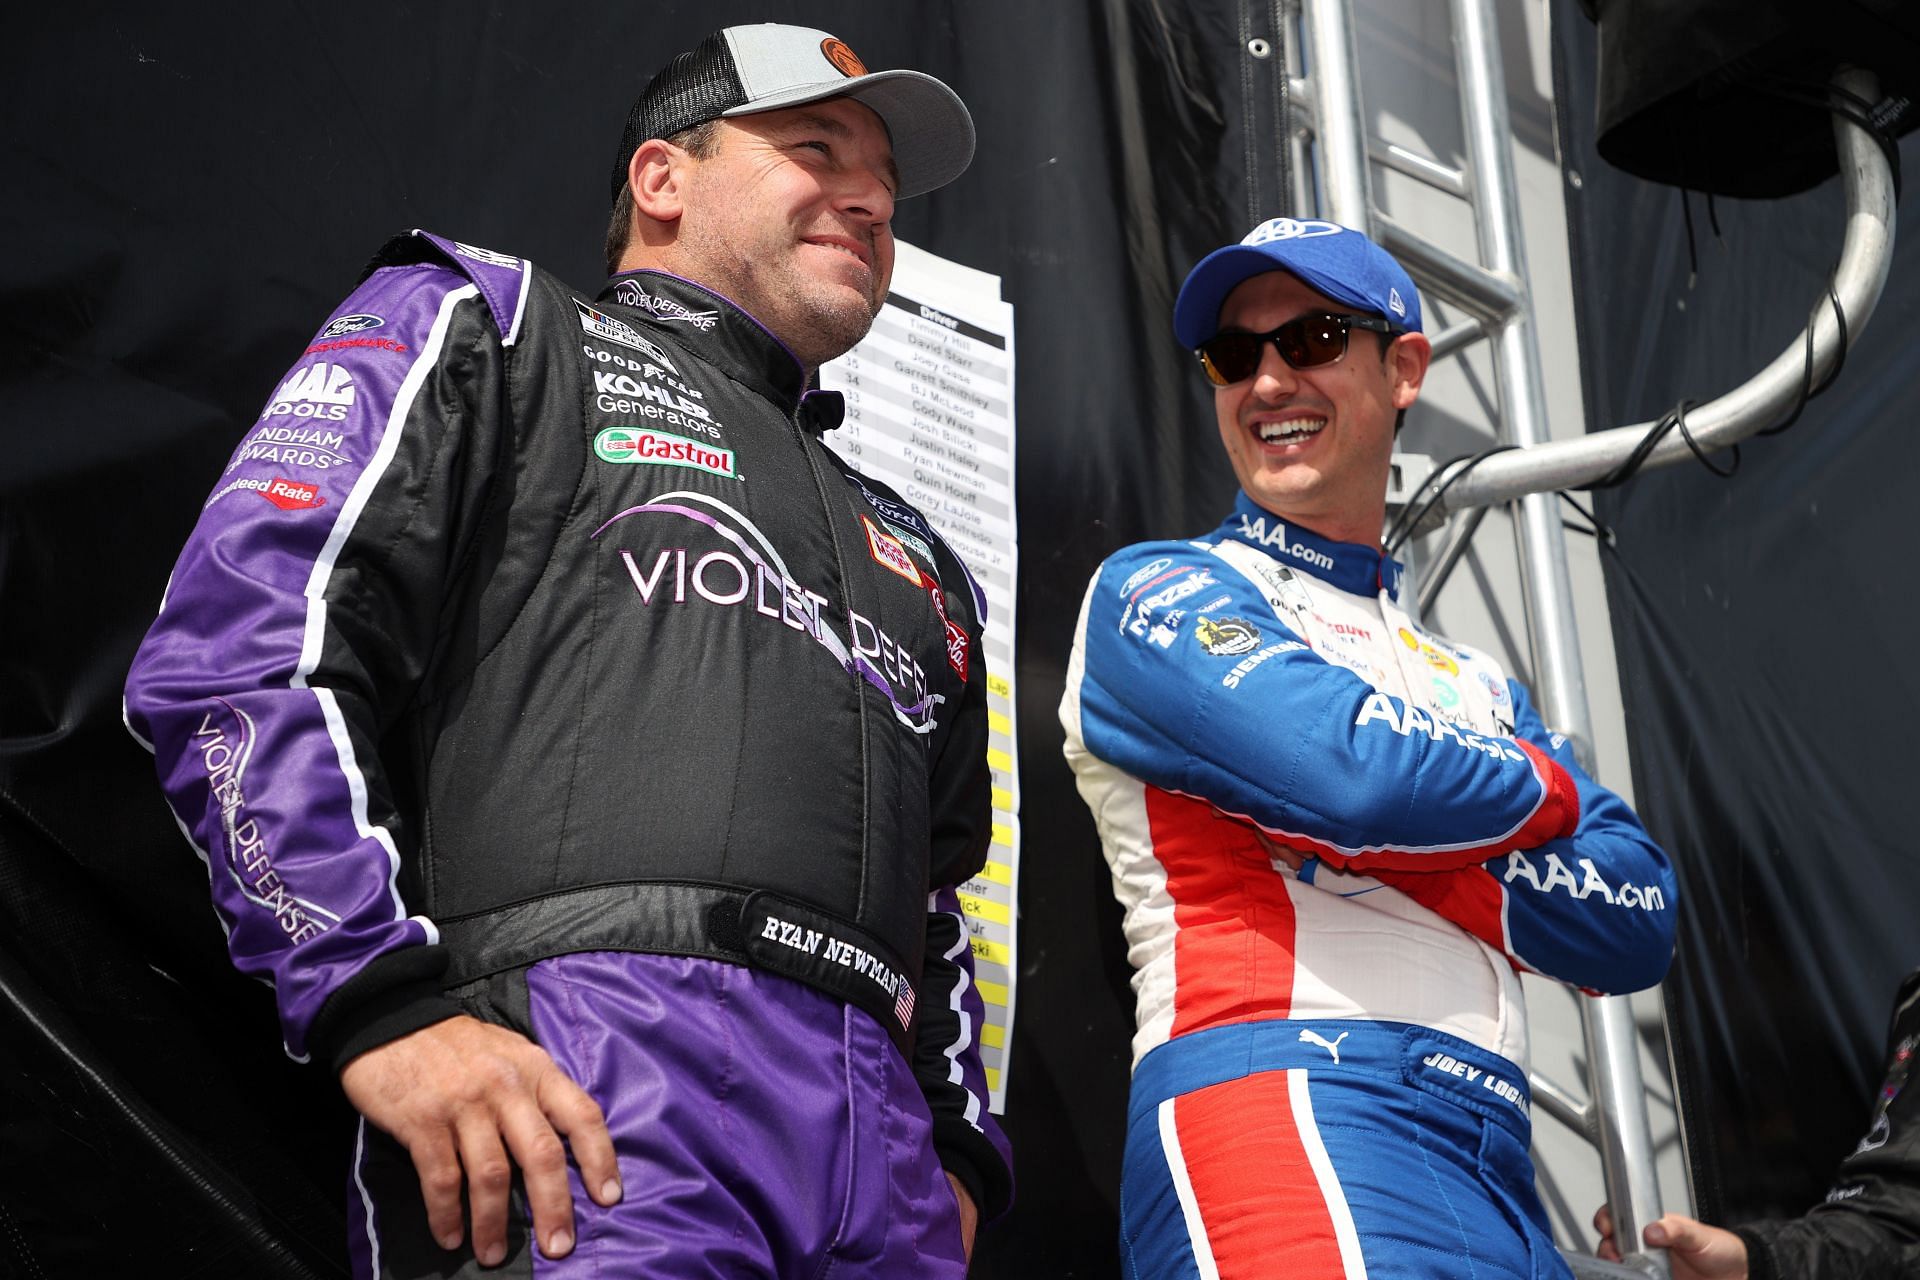 Ryan Newman (Left) and Joey Logano (Right) talk backstage during pre-race ceremonies prior to the NASCAR Cup Series Autotrader EchoPark Automotive 500 at Texas Motor Speedway.